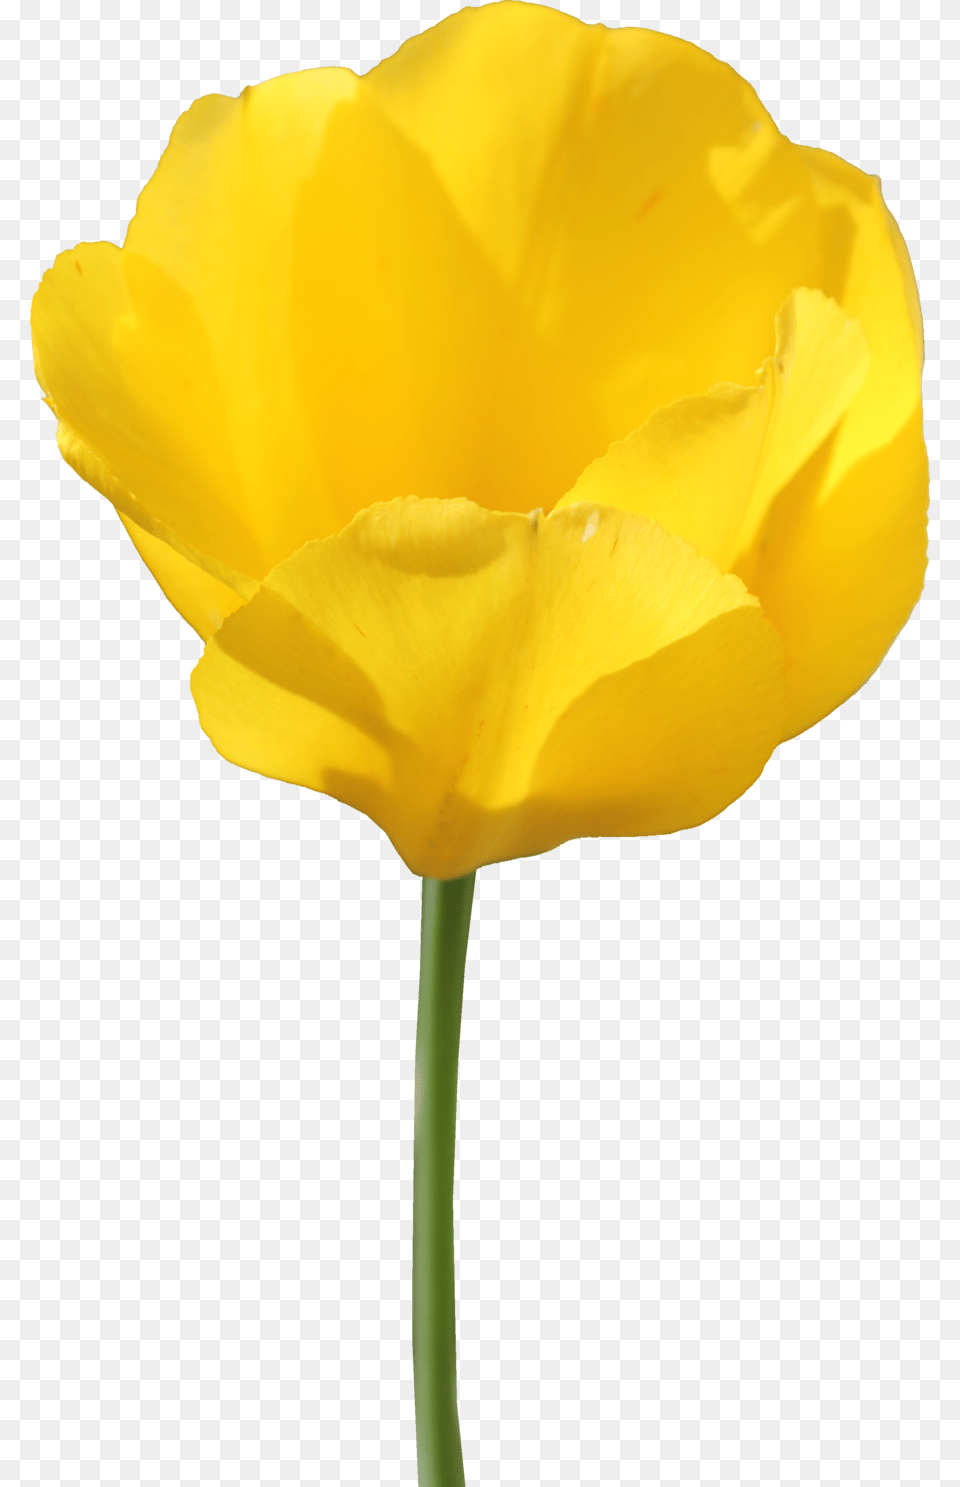 Yellow Tulip Yellow Tulips Transparent Background, Flower, Plant, Petal, Rose Png